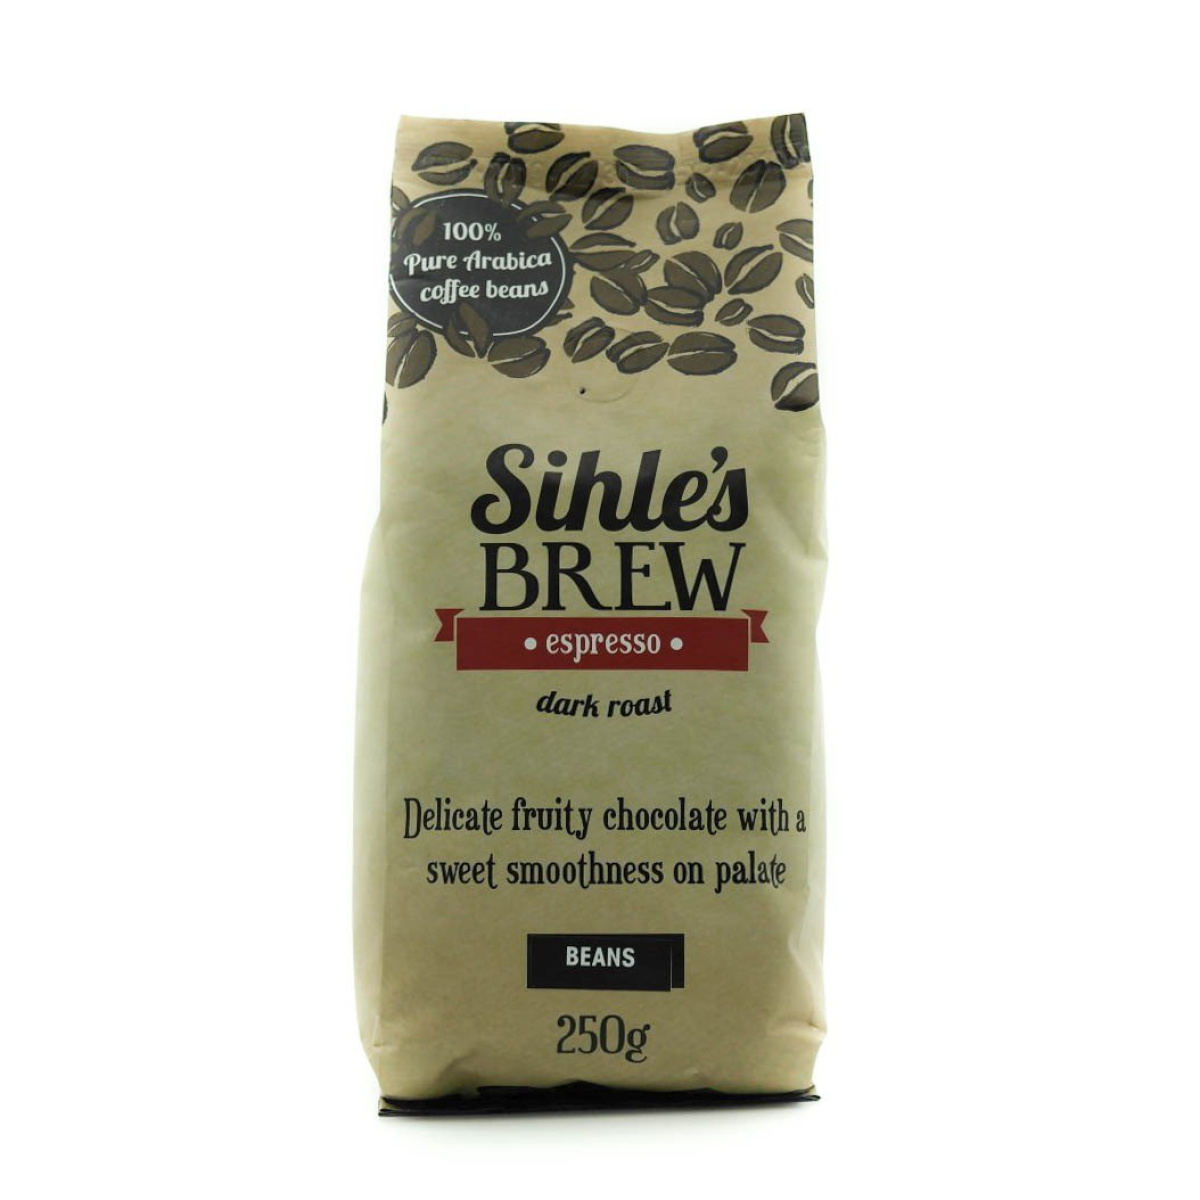 Sihle’s Brew Espresso 250g and 1kg